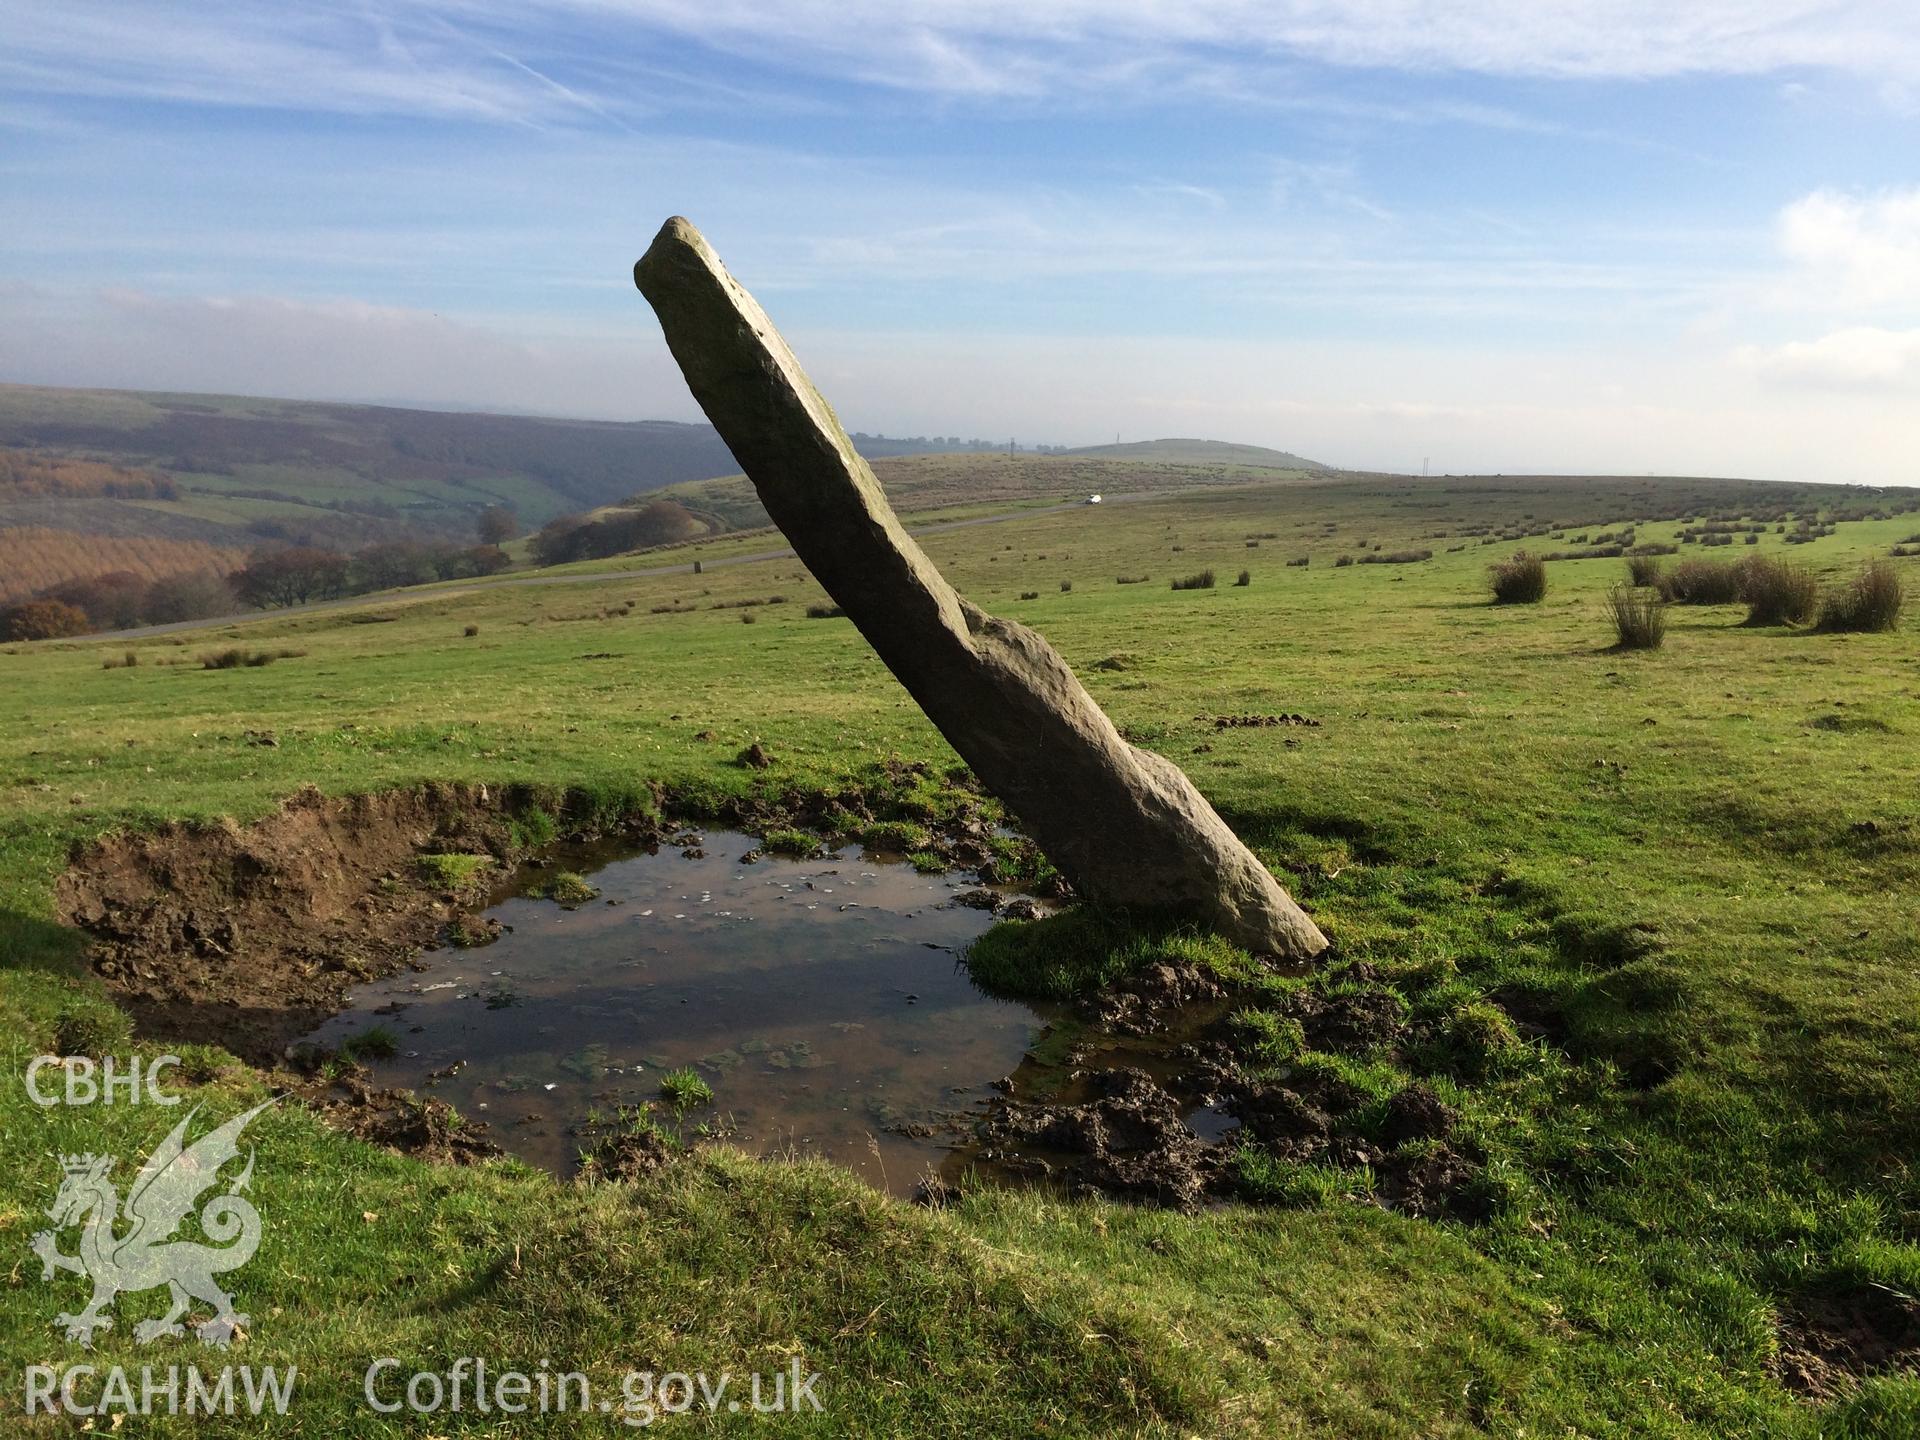 Colour photo of Cefn Gelli-Gaer Inscribed Stone, taken by Paul R. Davis and dated 31st October 2015.